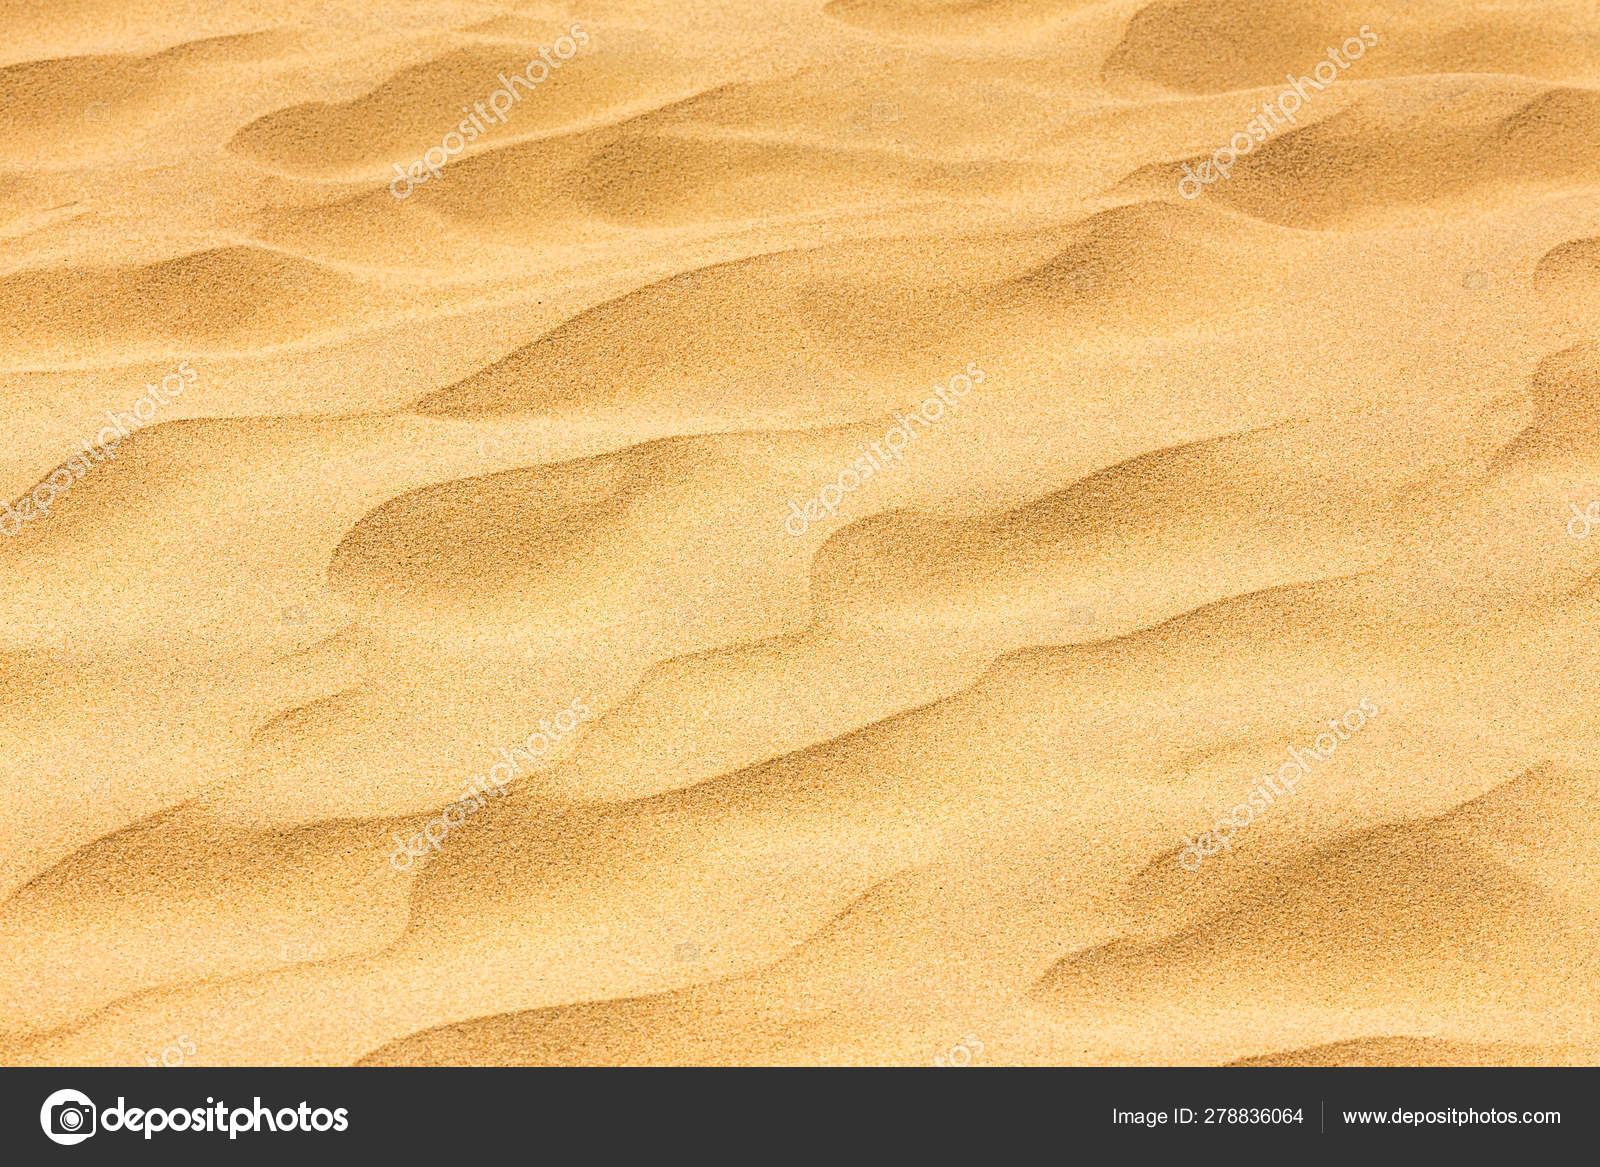 Background Image Of Desert Sand In The Dunes Stock Photo Image By C Ljphoto7 Gmail Com